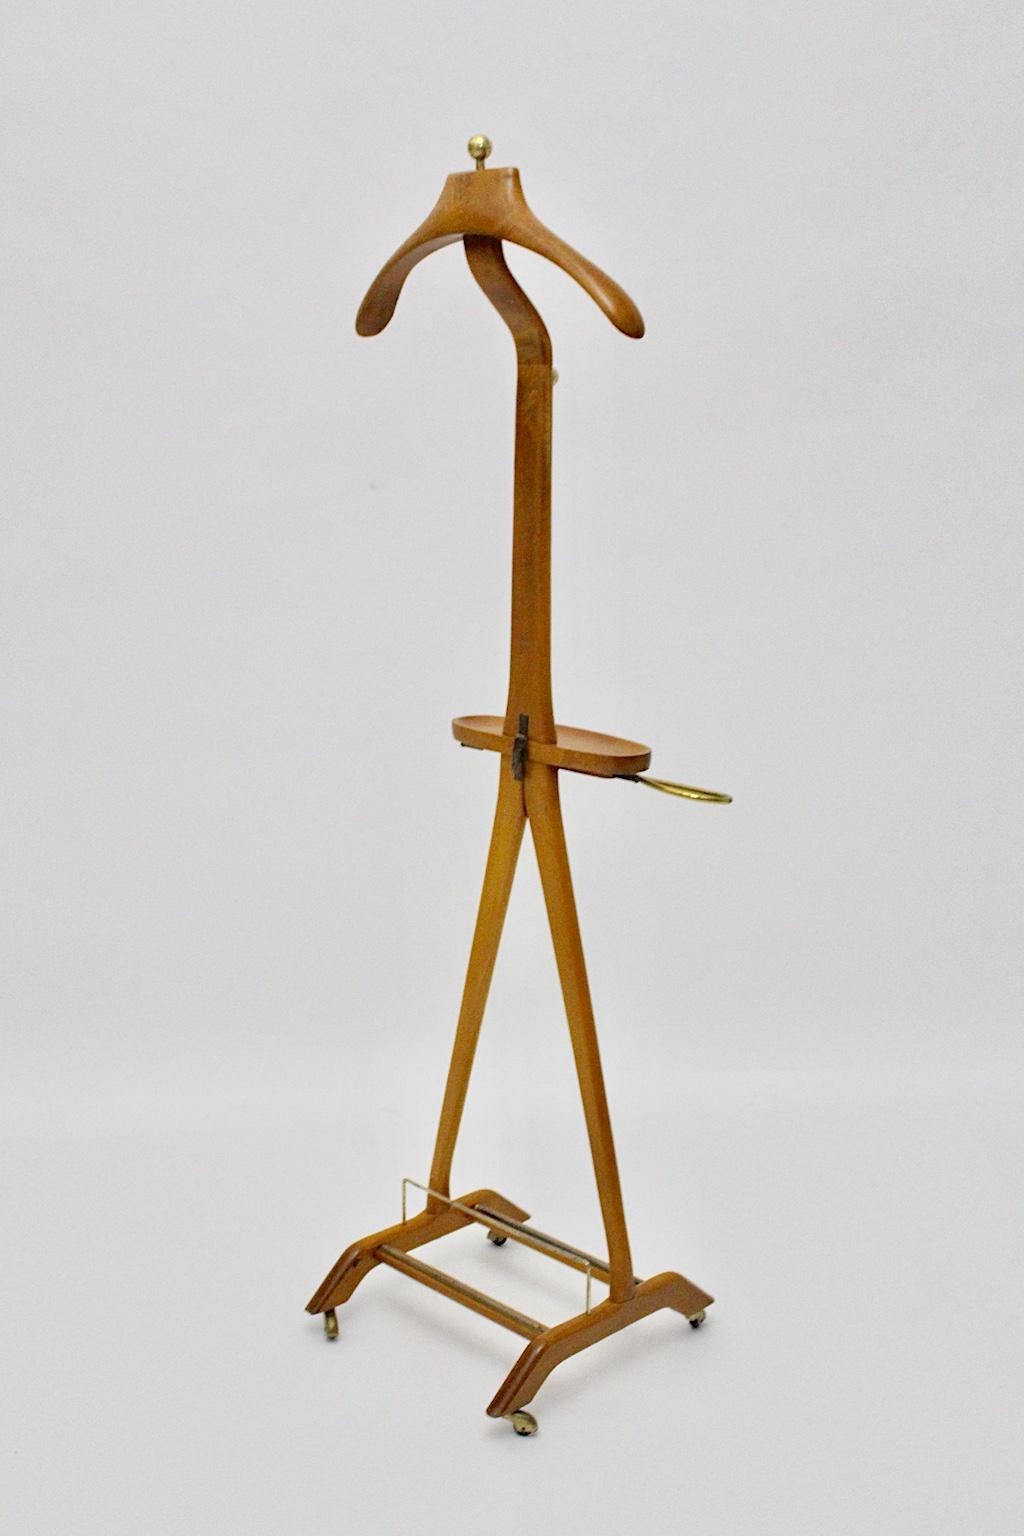 This Mid-Century Modern gentlemen vintage beech and brass valet / coat rack was designed by Ico & Luisa Paris 1950s for Fratelli Reguitti, Italy.
The natural lacquered beech valet shows brass details. Furthermore the valet is easy to disassemble